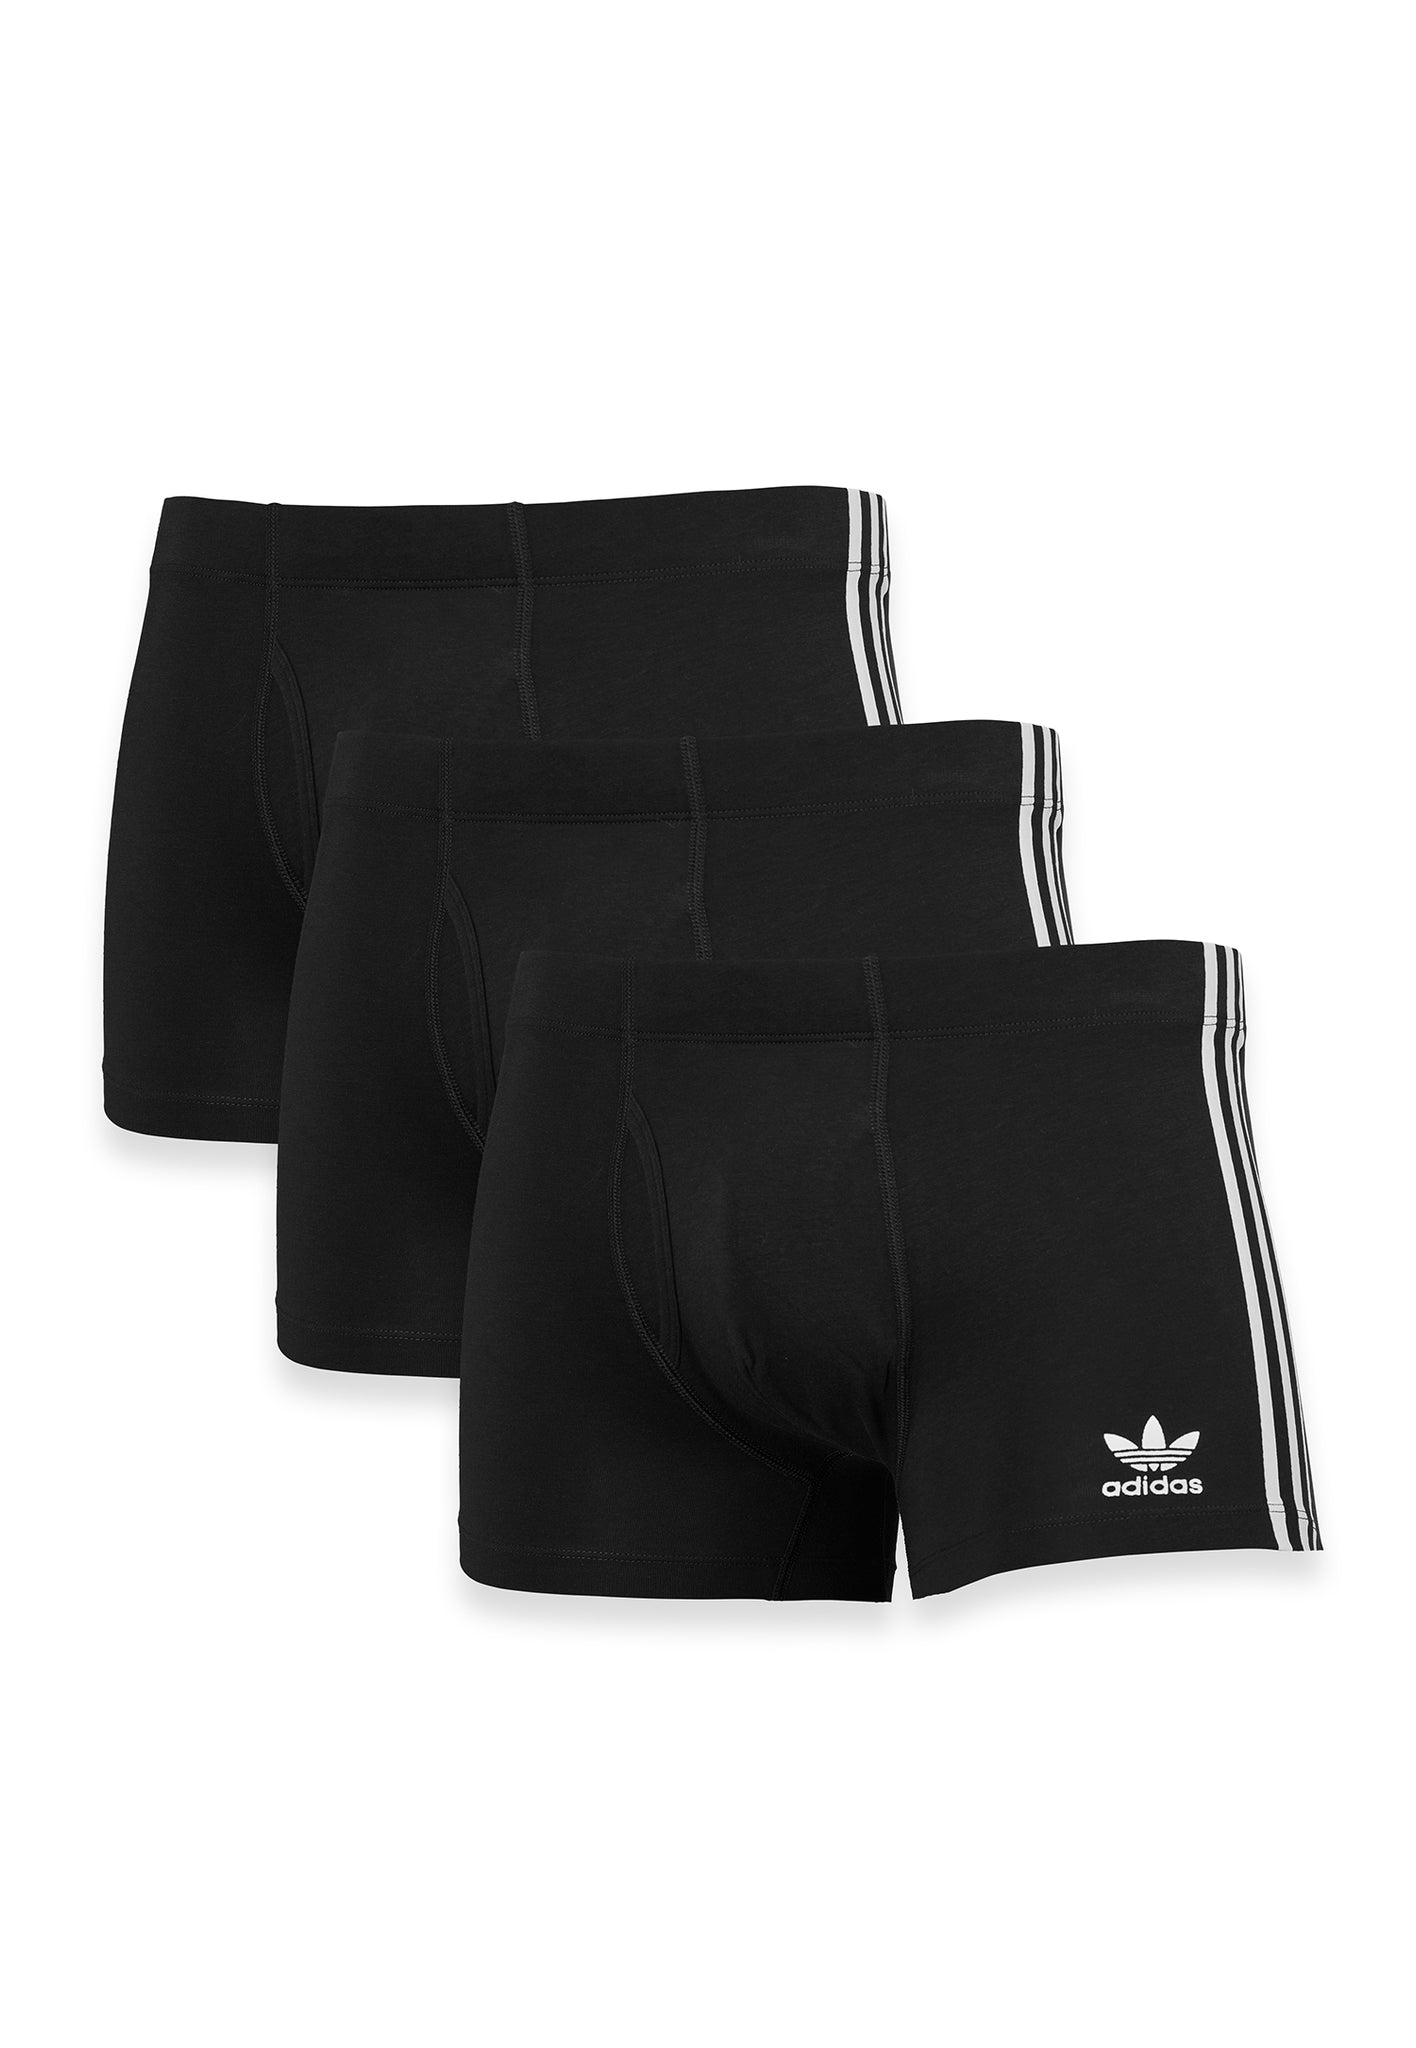 ADIDAS Performance Underwear 3 Pack Quick-Dry Fabric Size L Boxer